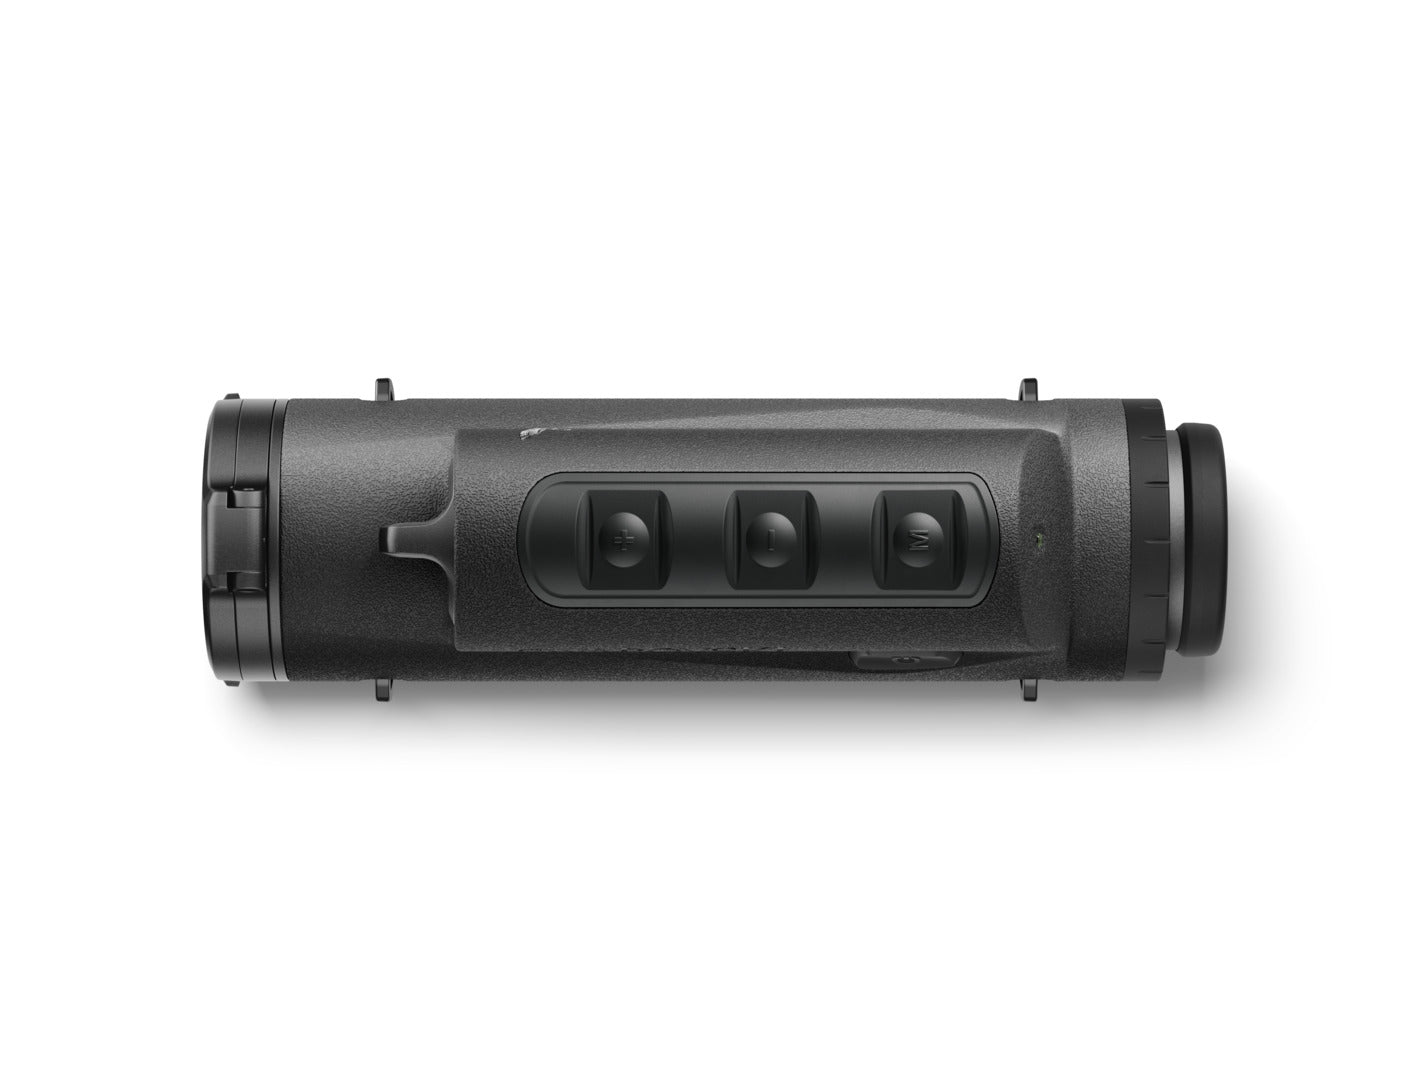 tM35 Thermal Attachable Monocular 